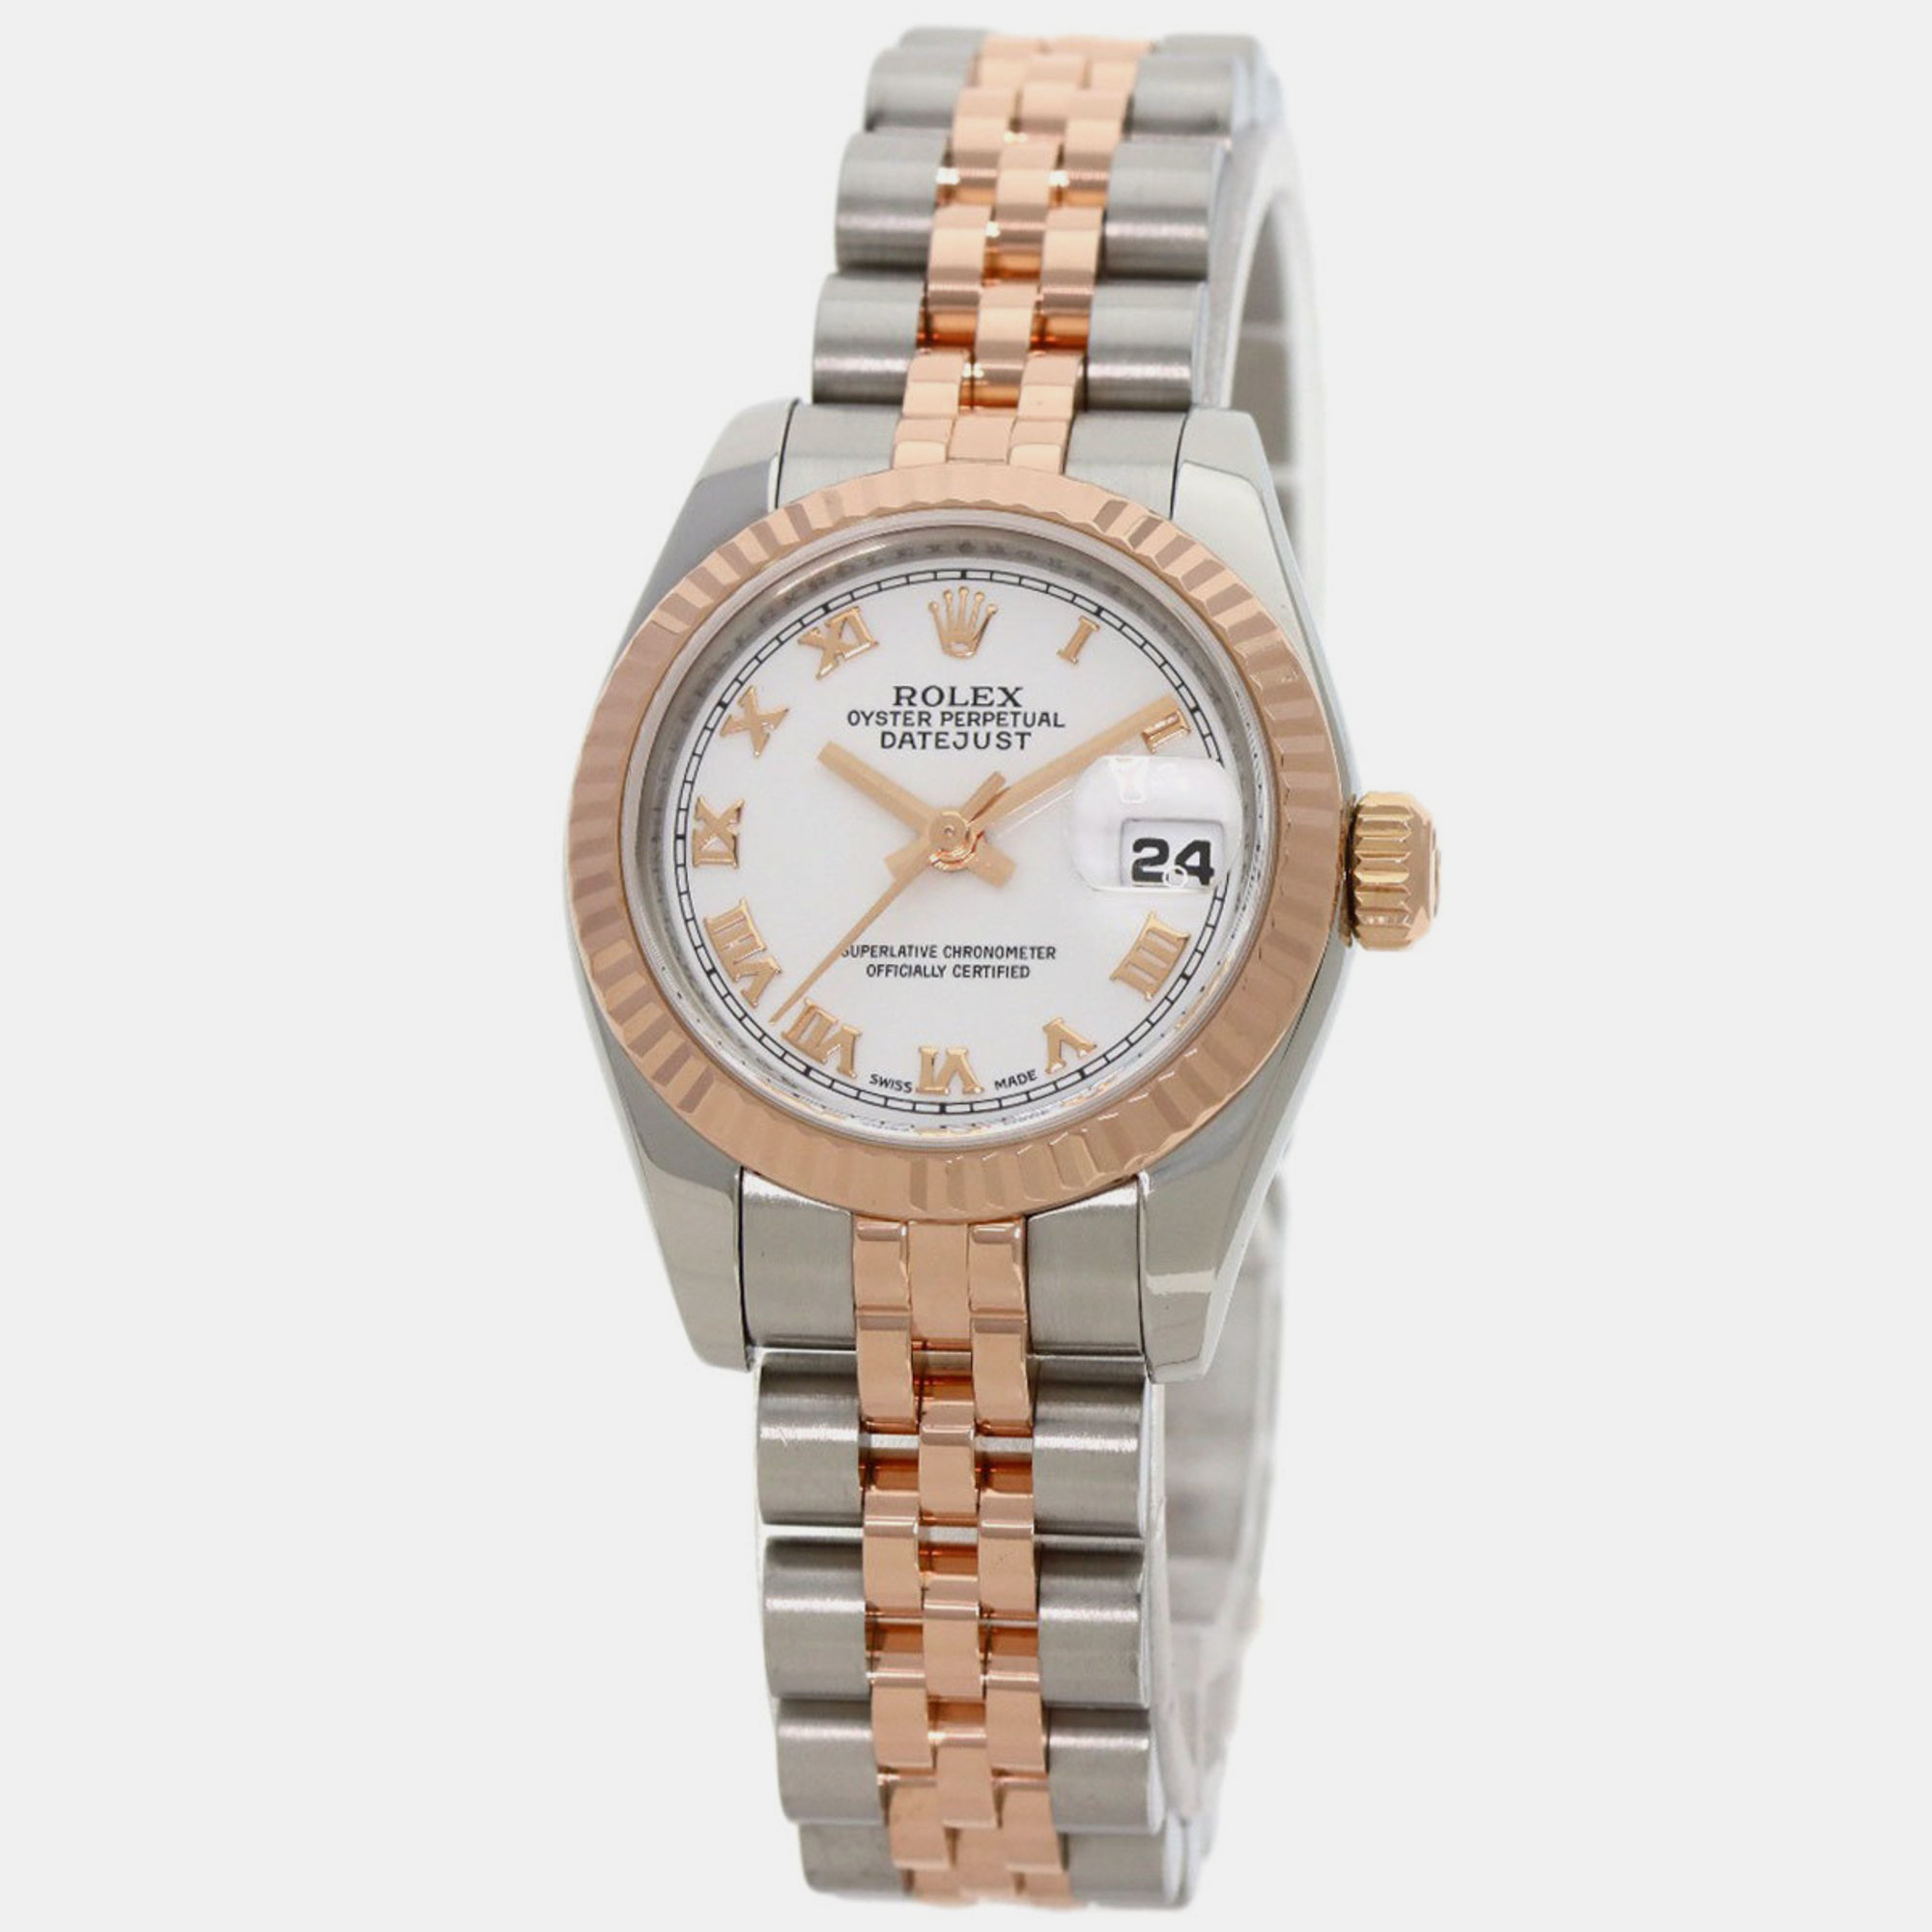 Rolex white 18k rose gold stainless steel datejust automatic women's wristwatch 26 mm